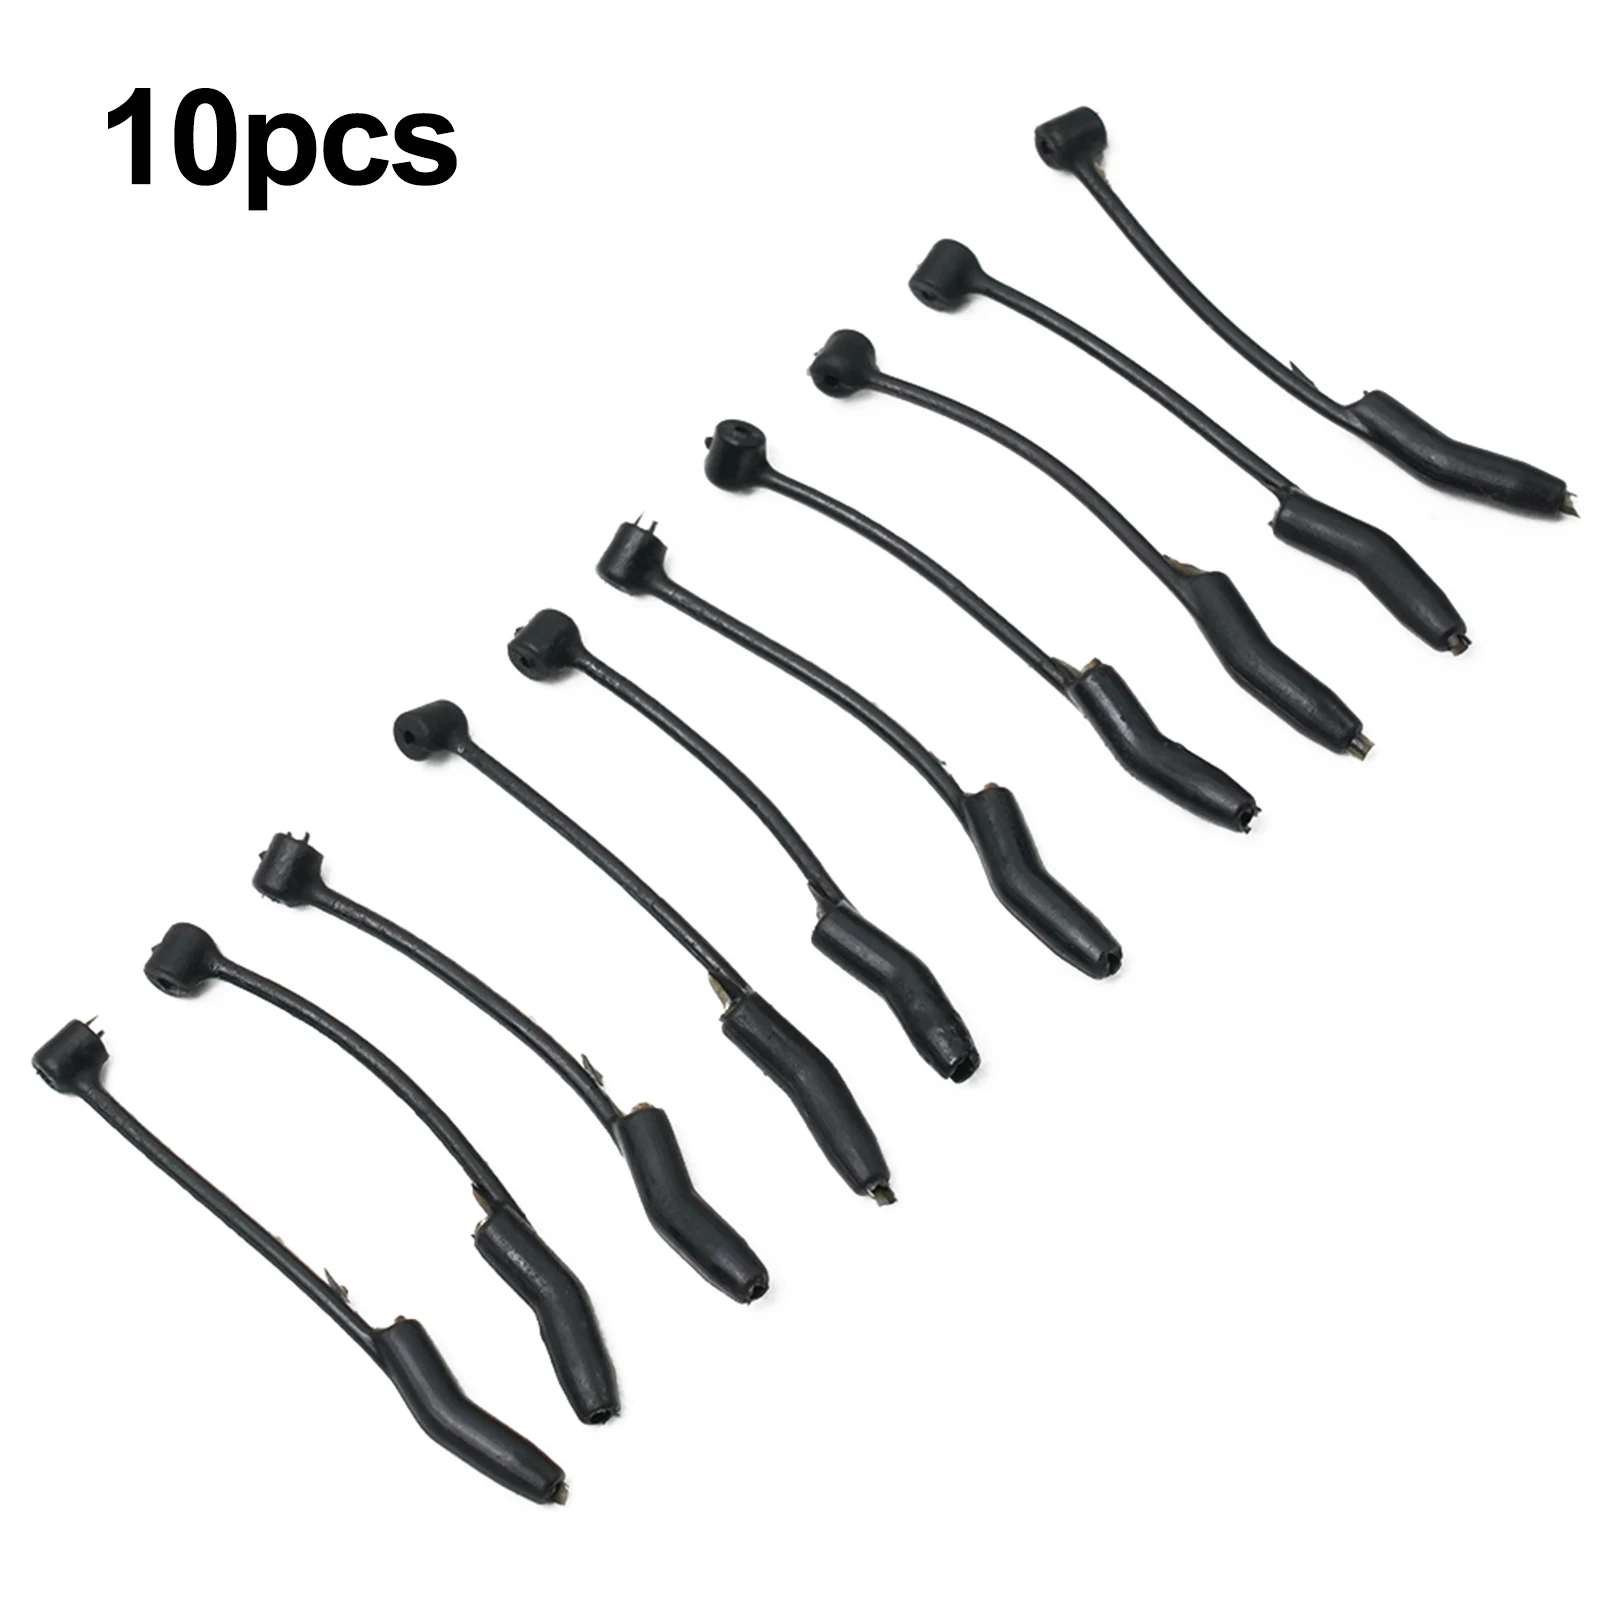 

D-Rig Kickers Carp Fishing Accessories Hooks Anti Tangle Sleeves For Ronnie Rigs Pesca Tackle High Quality Fishing Tools